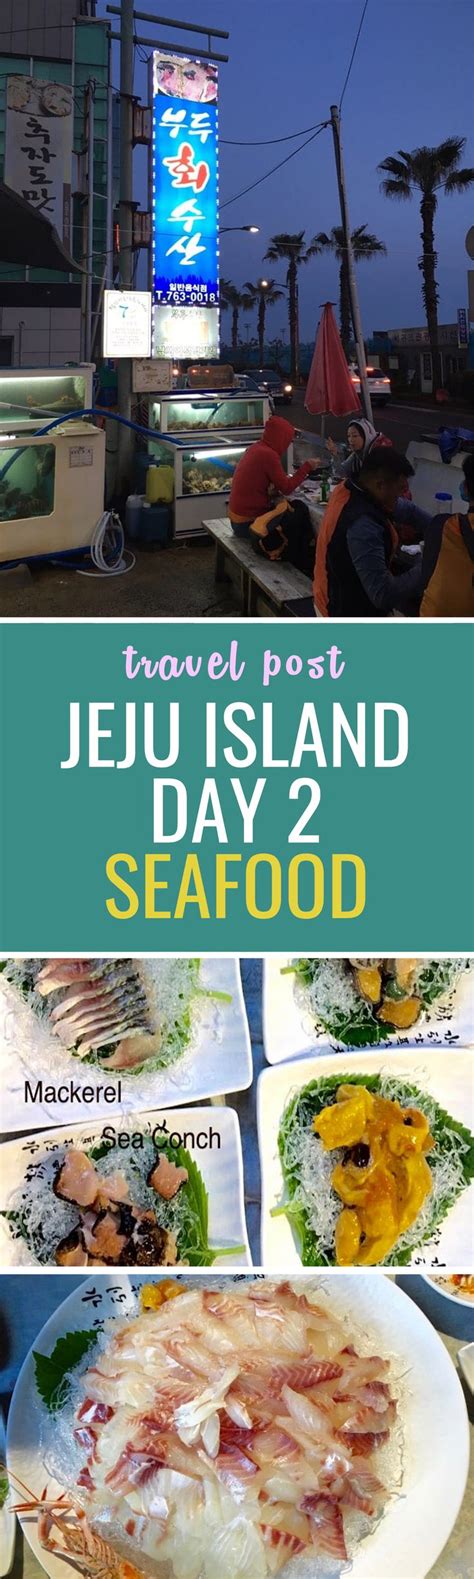 Travel post : Jeju Island of Korea has one of the best seafood delicacies. This is my review of ...